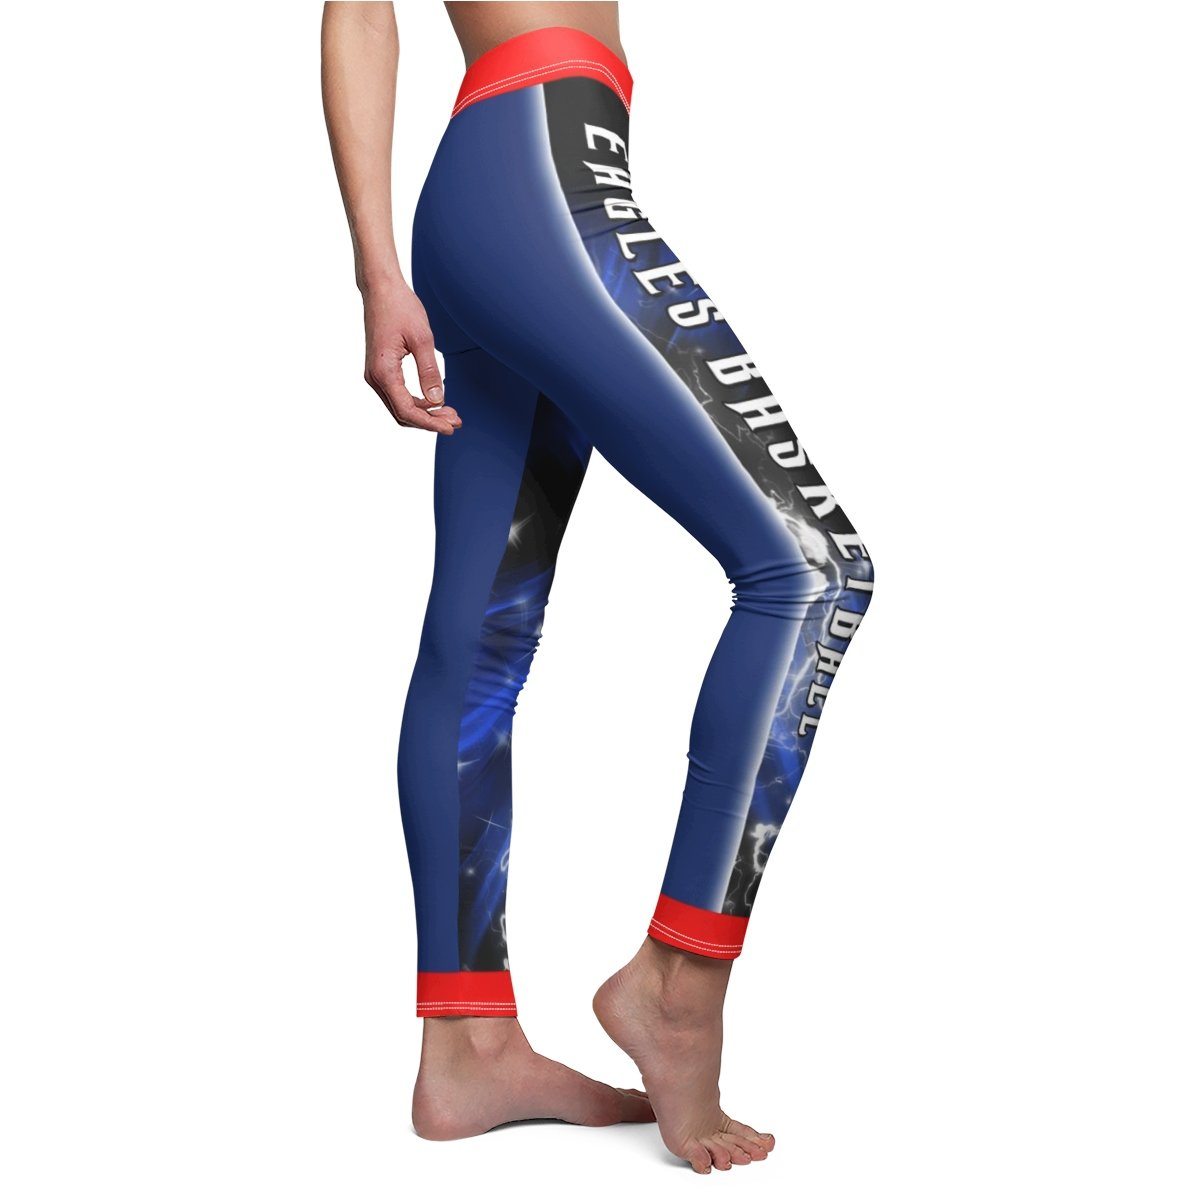 Fusion - V.5 - Extreme Sportswear Cut & Sew Leggings Template-Photoshop Template - Photo Solutions